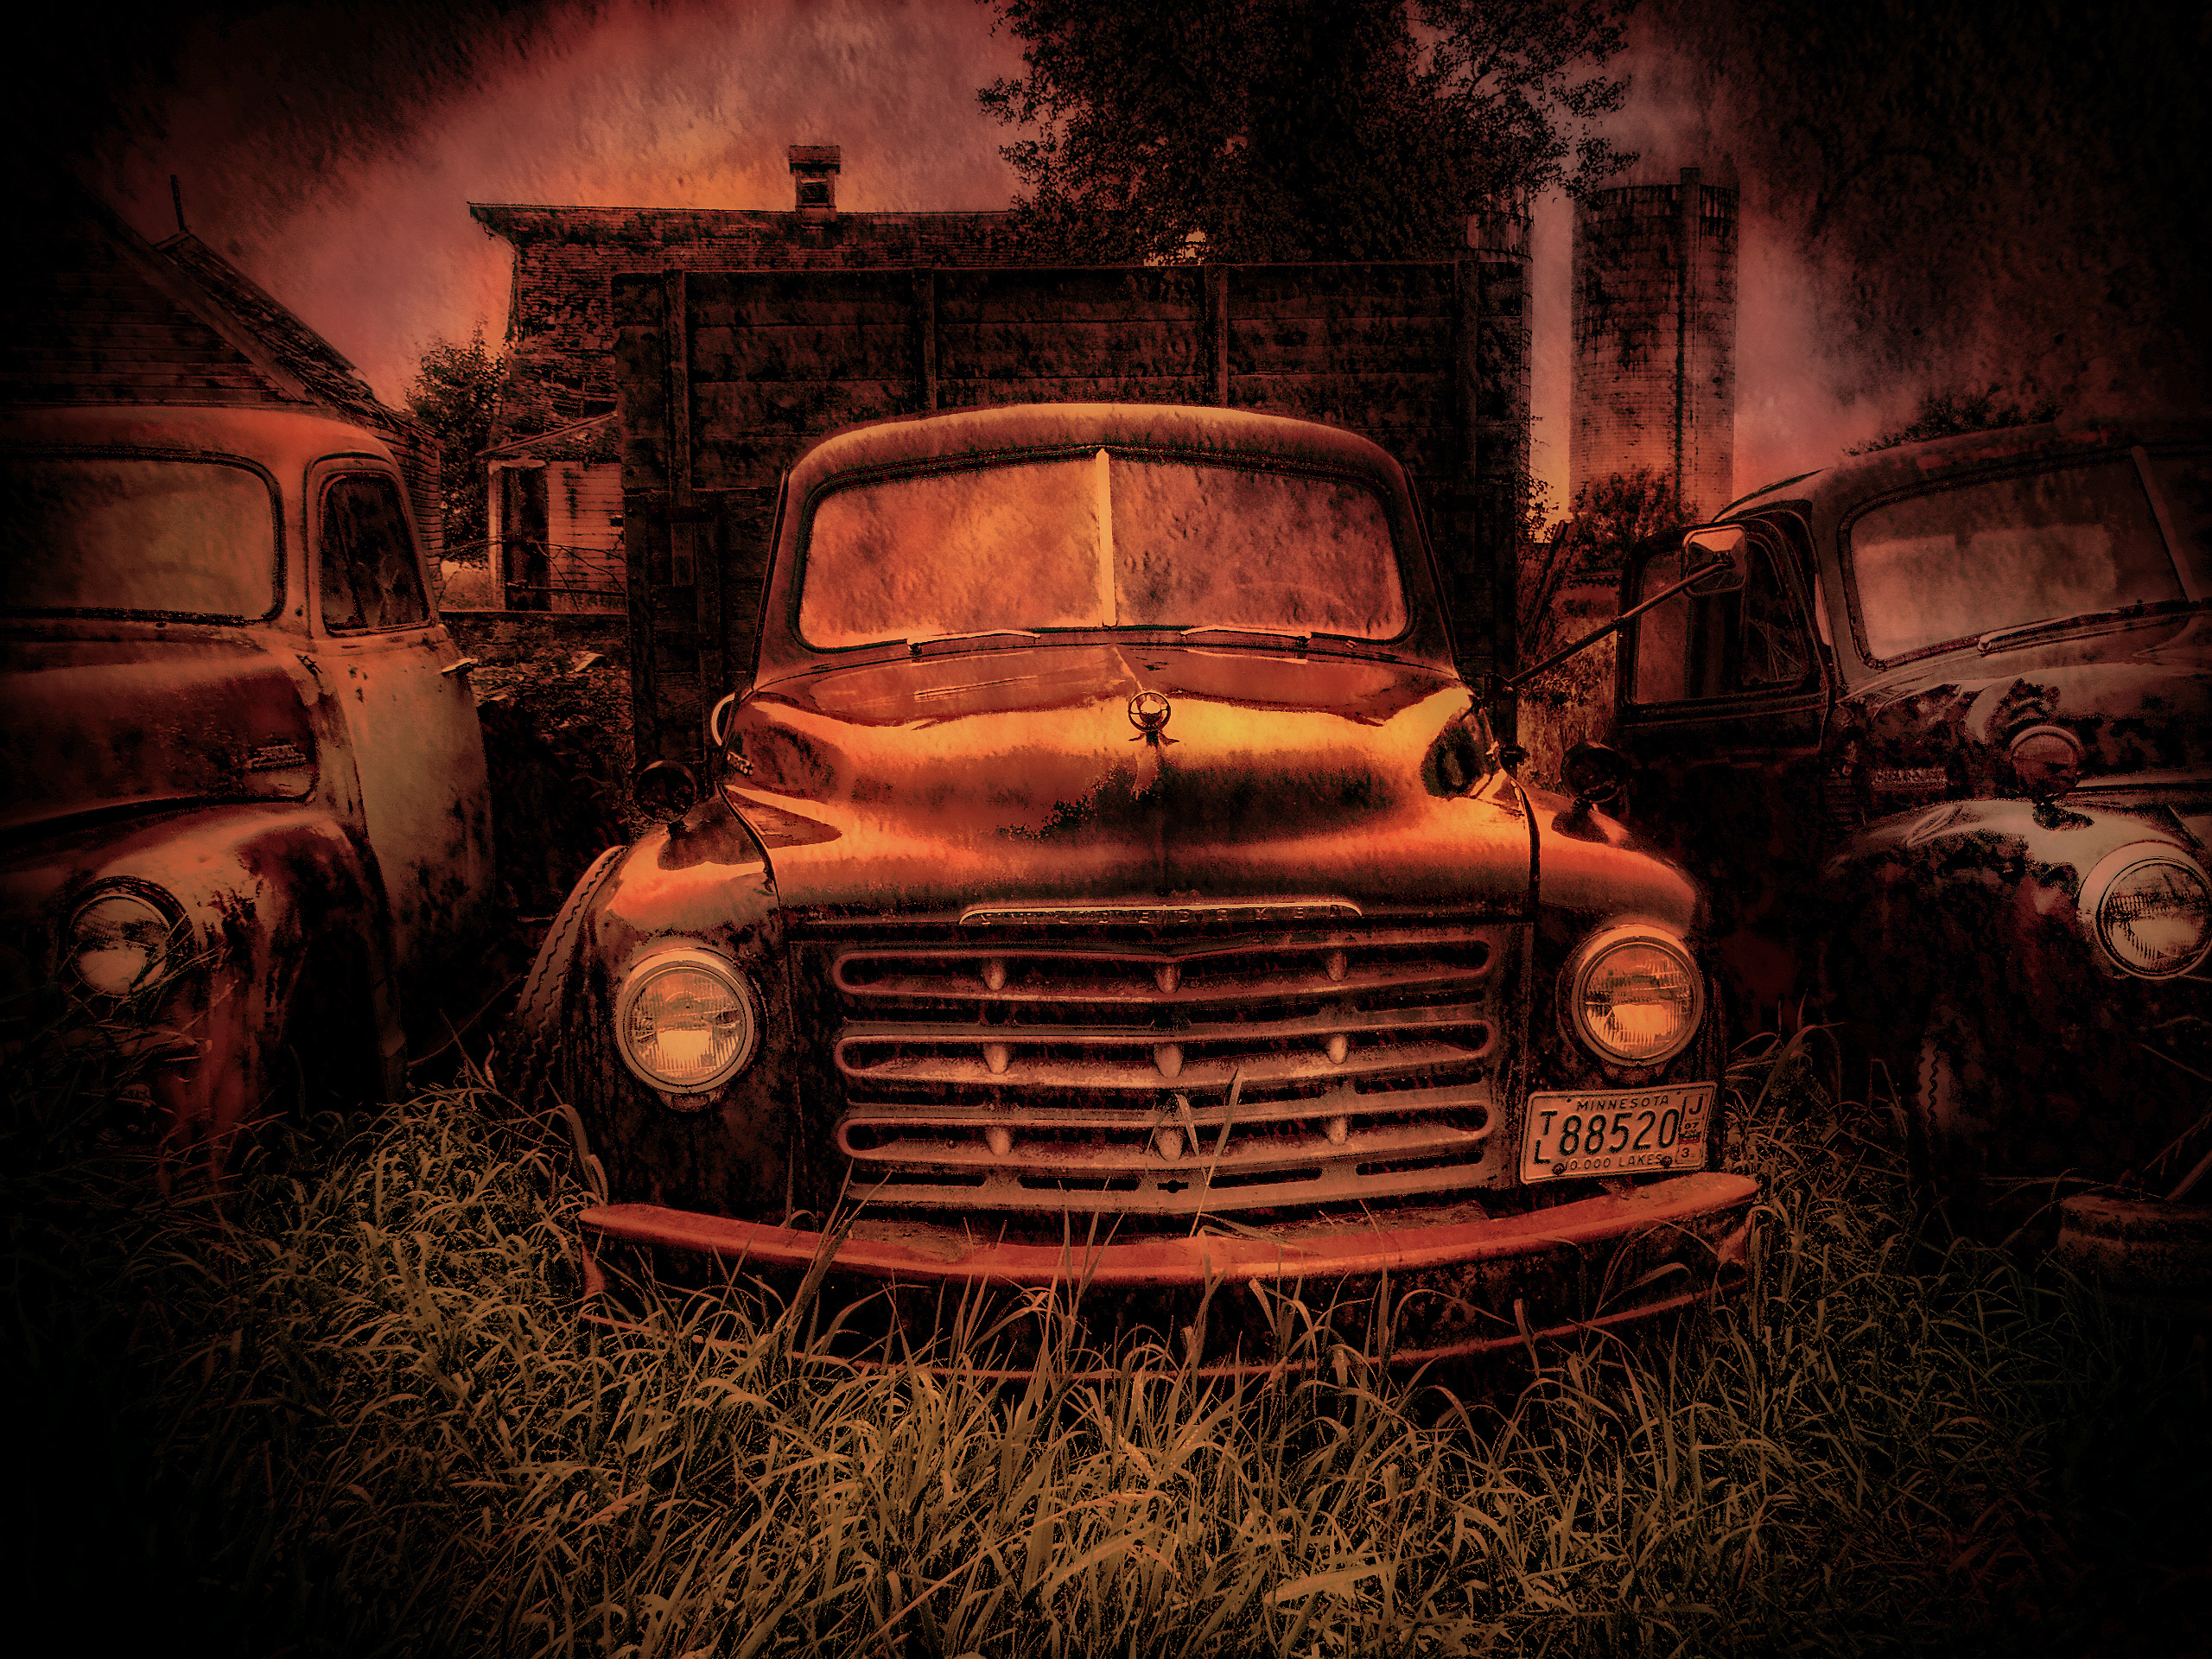 Wallpaper, night, farm, rust, texture, USA, decay, Vintage car, Chevrolet, Truck, Minnesota, Chevy, rural, country, darkness, classic, texturized, magicunicornverybest, tatot, computer wallpaper, automotive design, compact car, motor vehicle, mid size